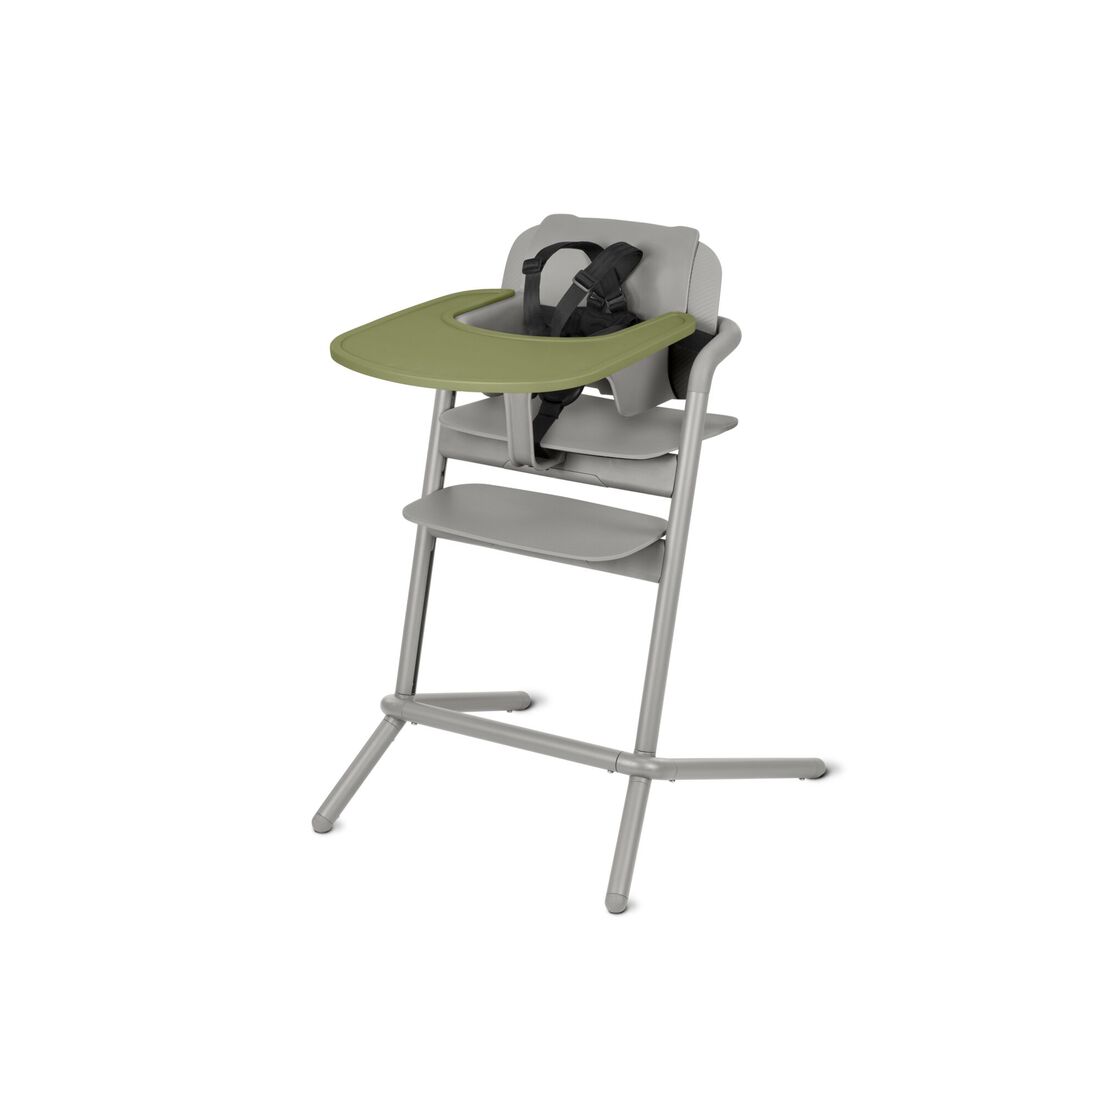 CYBEX Plateau Lemo - Outback Green in Outback Green large numéro d’image 1